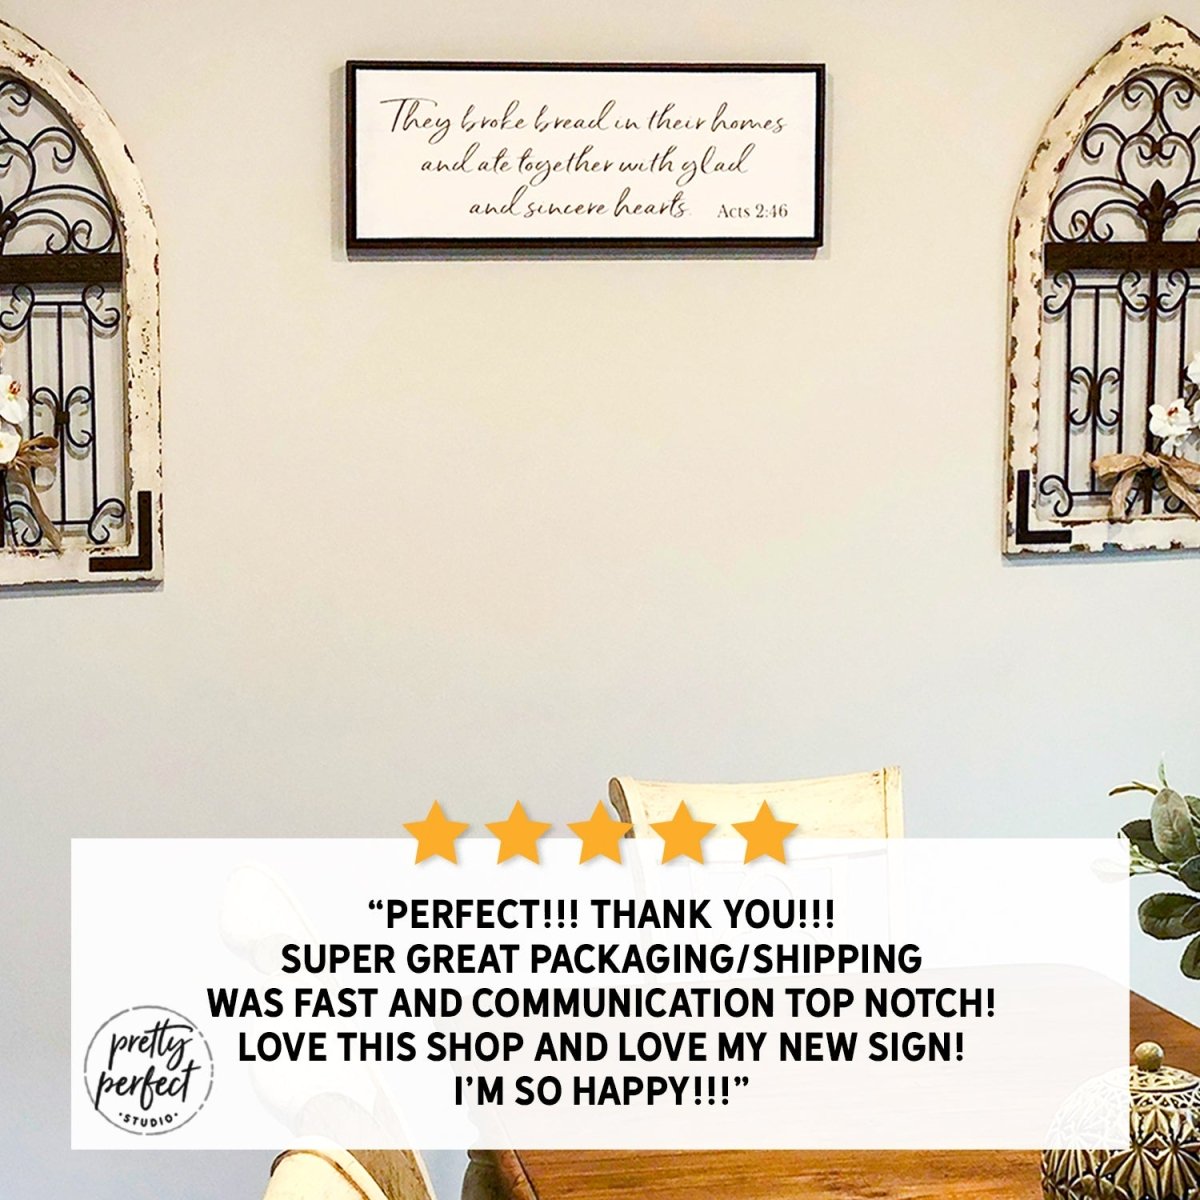 Customer product review for they broke bread in their homes sign by Pretty Perfect Studio